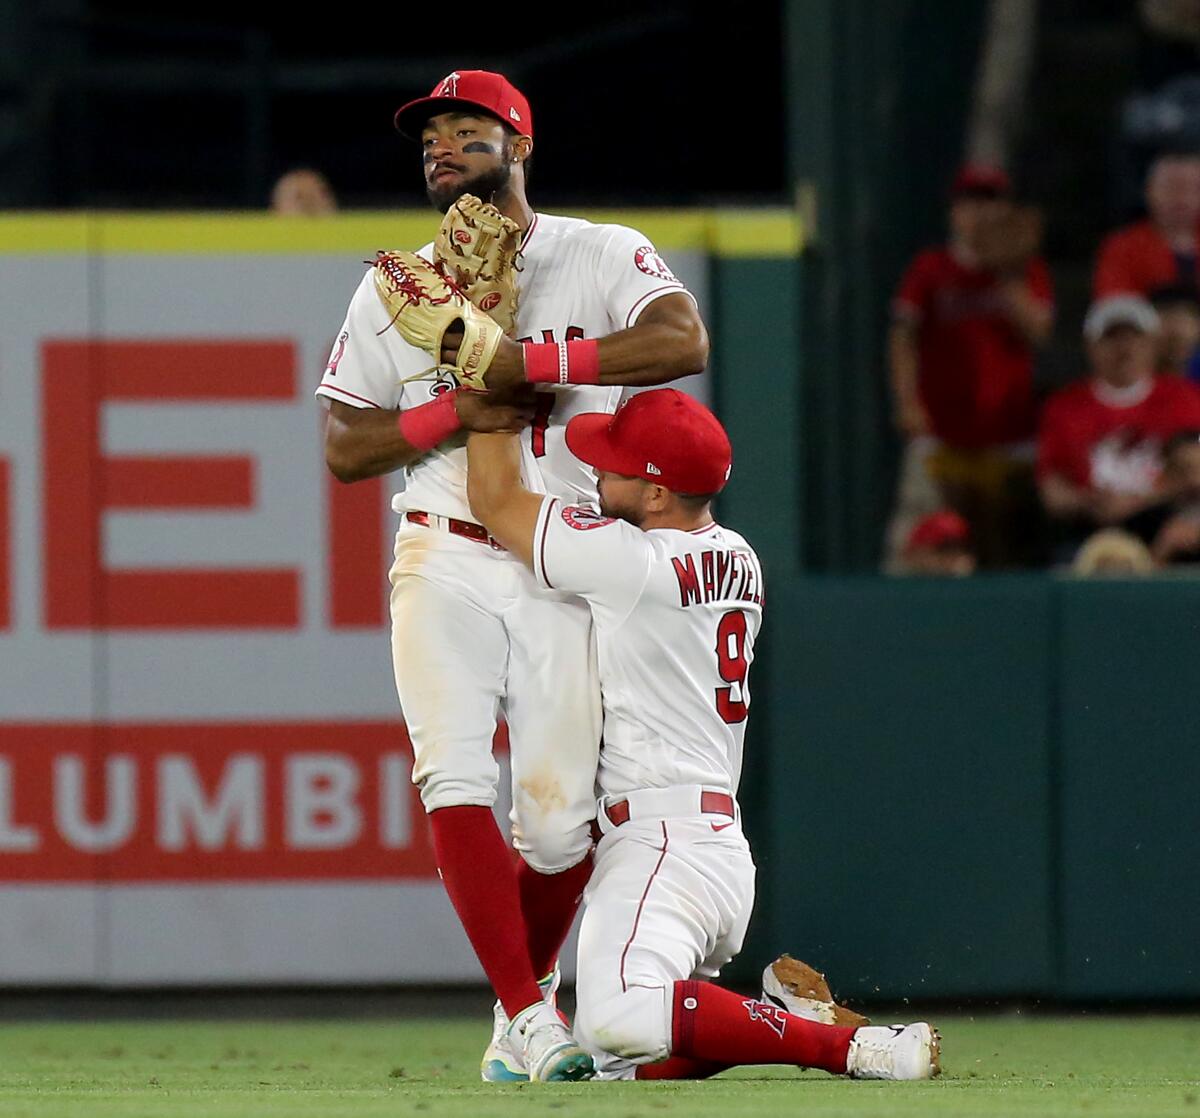 Angels second baseman Jack Mayfield gets tied up with teammate Jo Adell after catching a fly ball June 8, 2022.